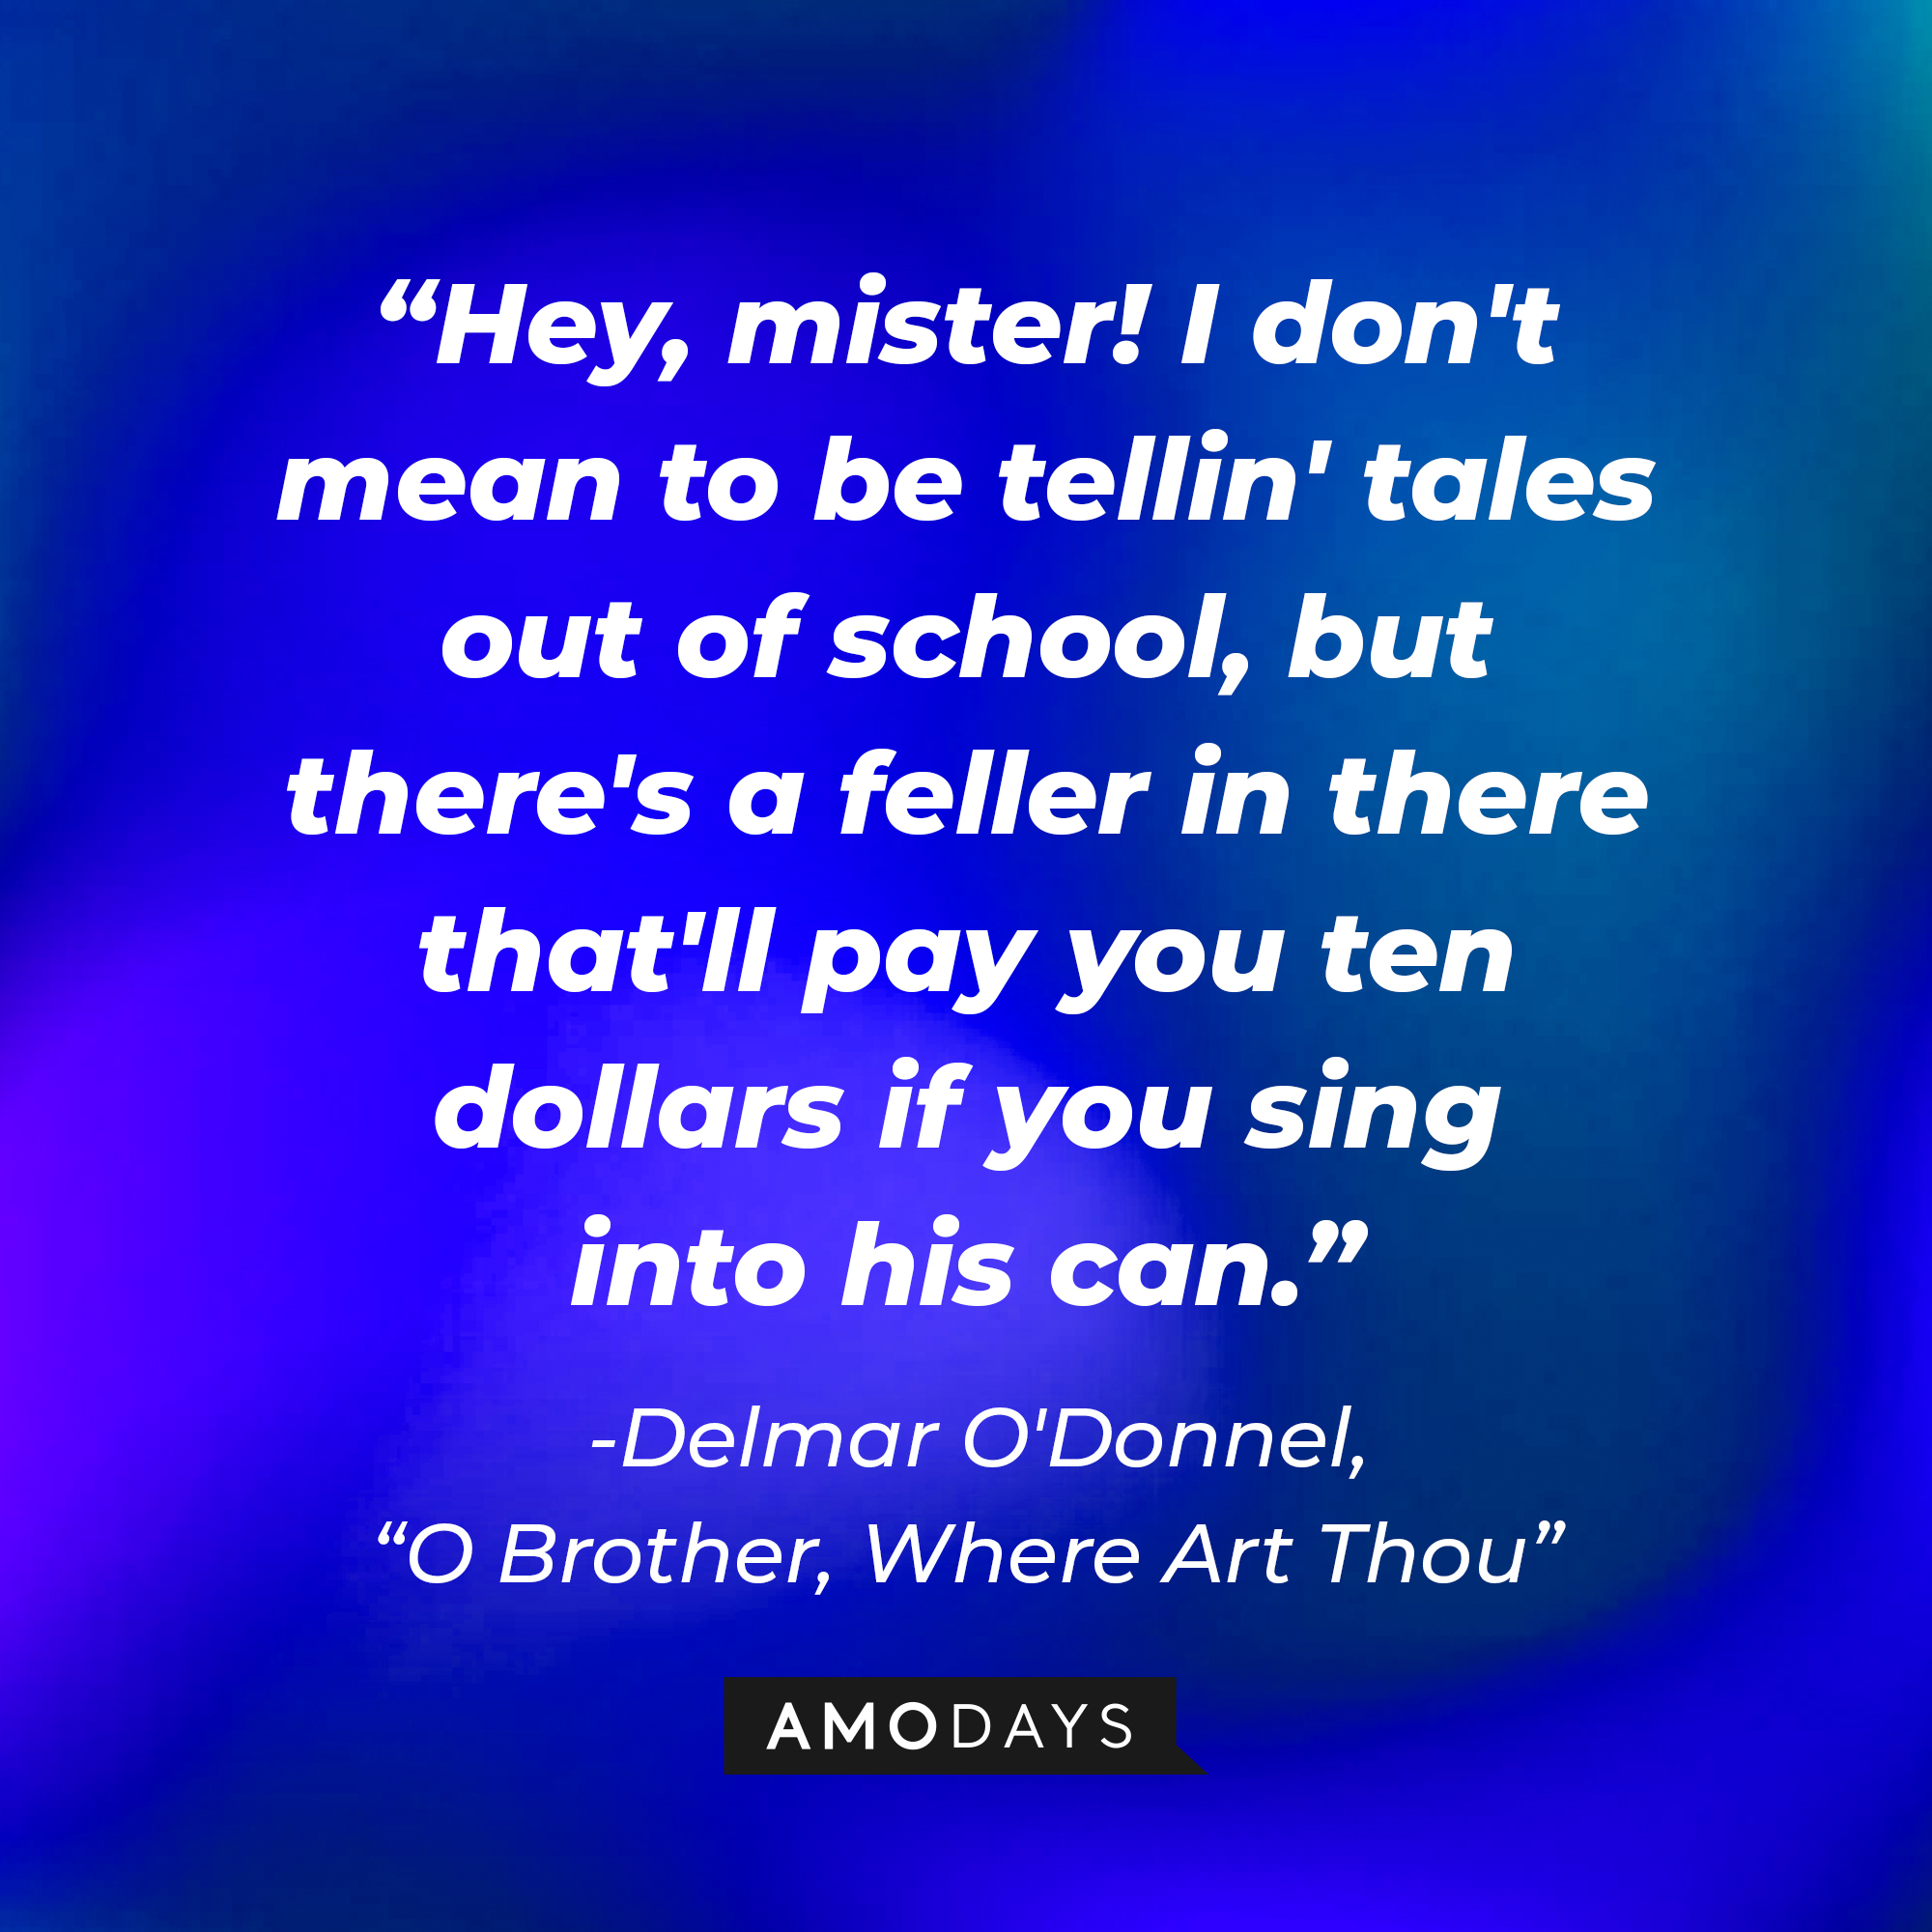 Delmar O'Donnell's quote in "O Brother, Where Art Thou:" "Hey, mister! I don't mean to be tellin' tales out of school, but there's a feller in there that'll pay you ten dollars if you sing into his can." | Source: AmoDays